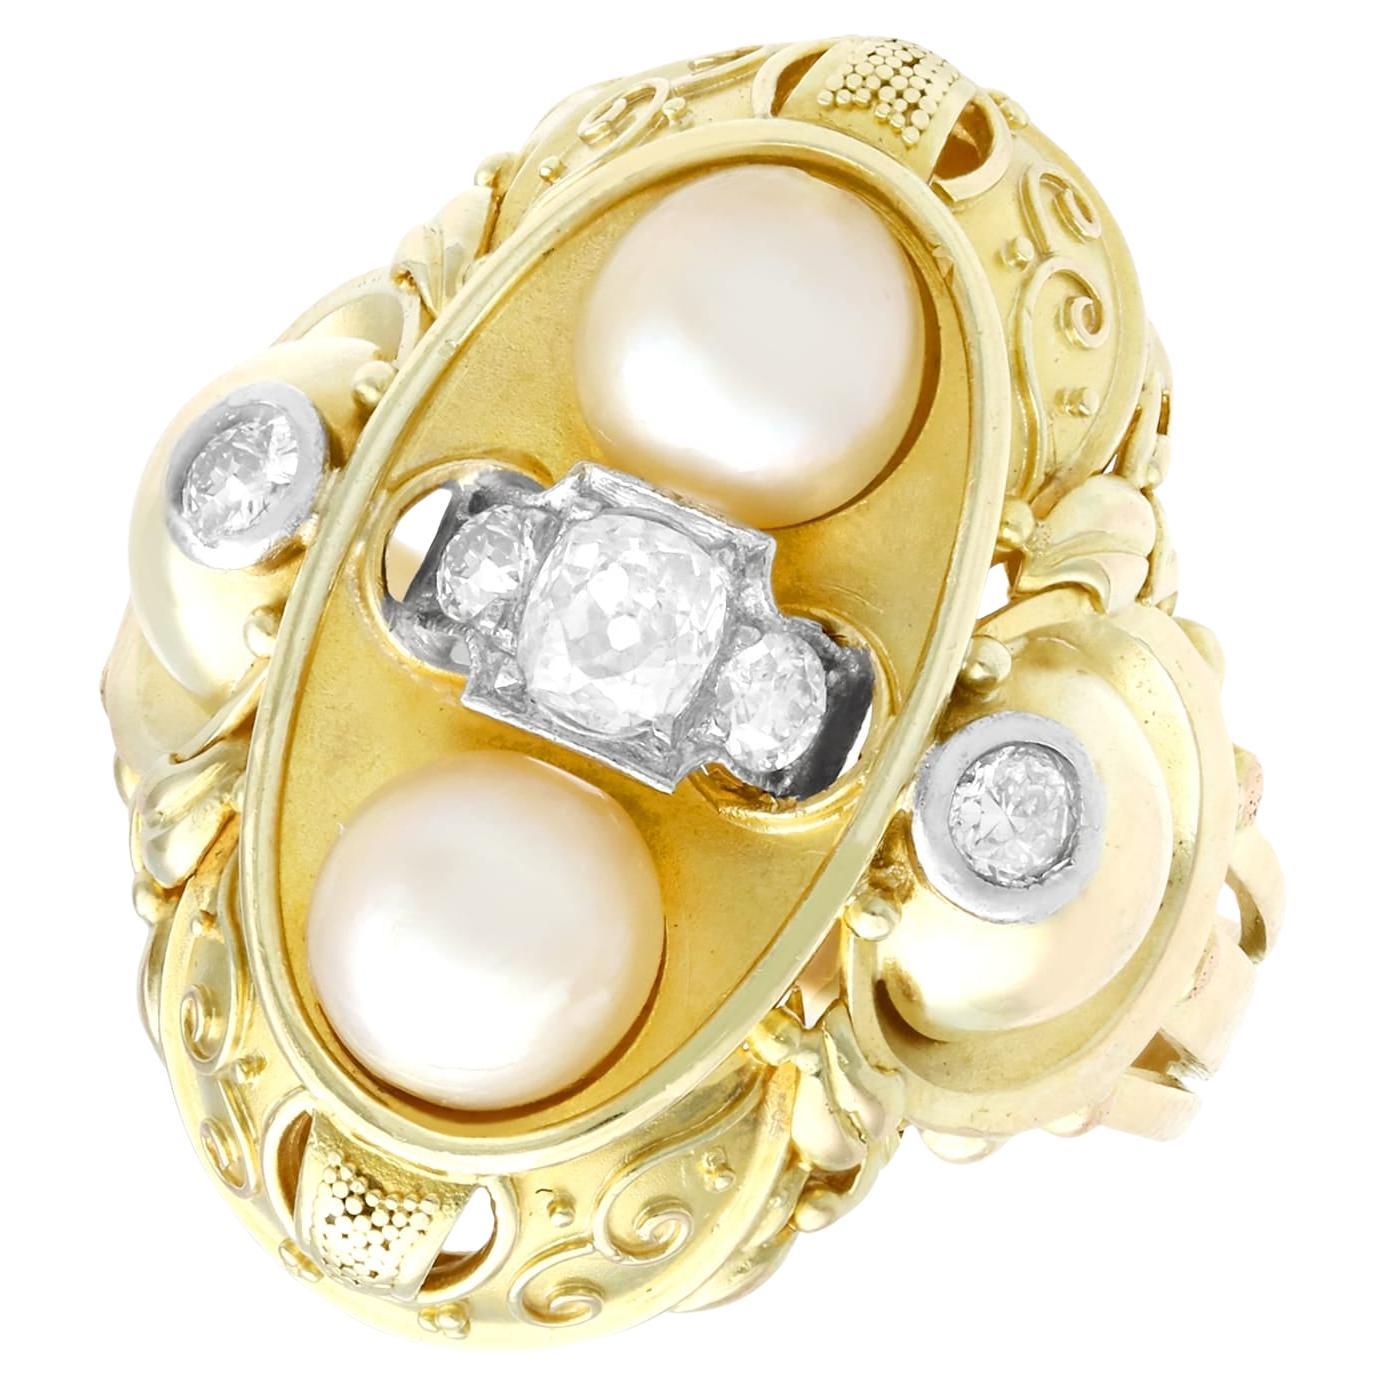 Vintage 1950s German Pearl Diamond Yellow Gold Cocktail Ring